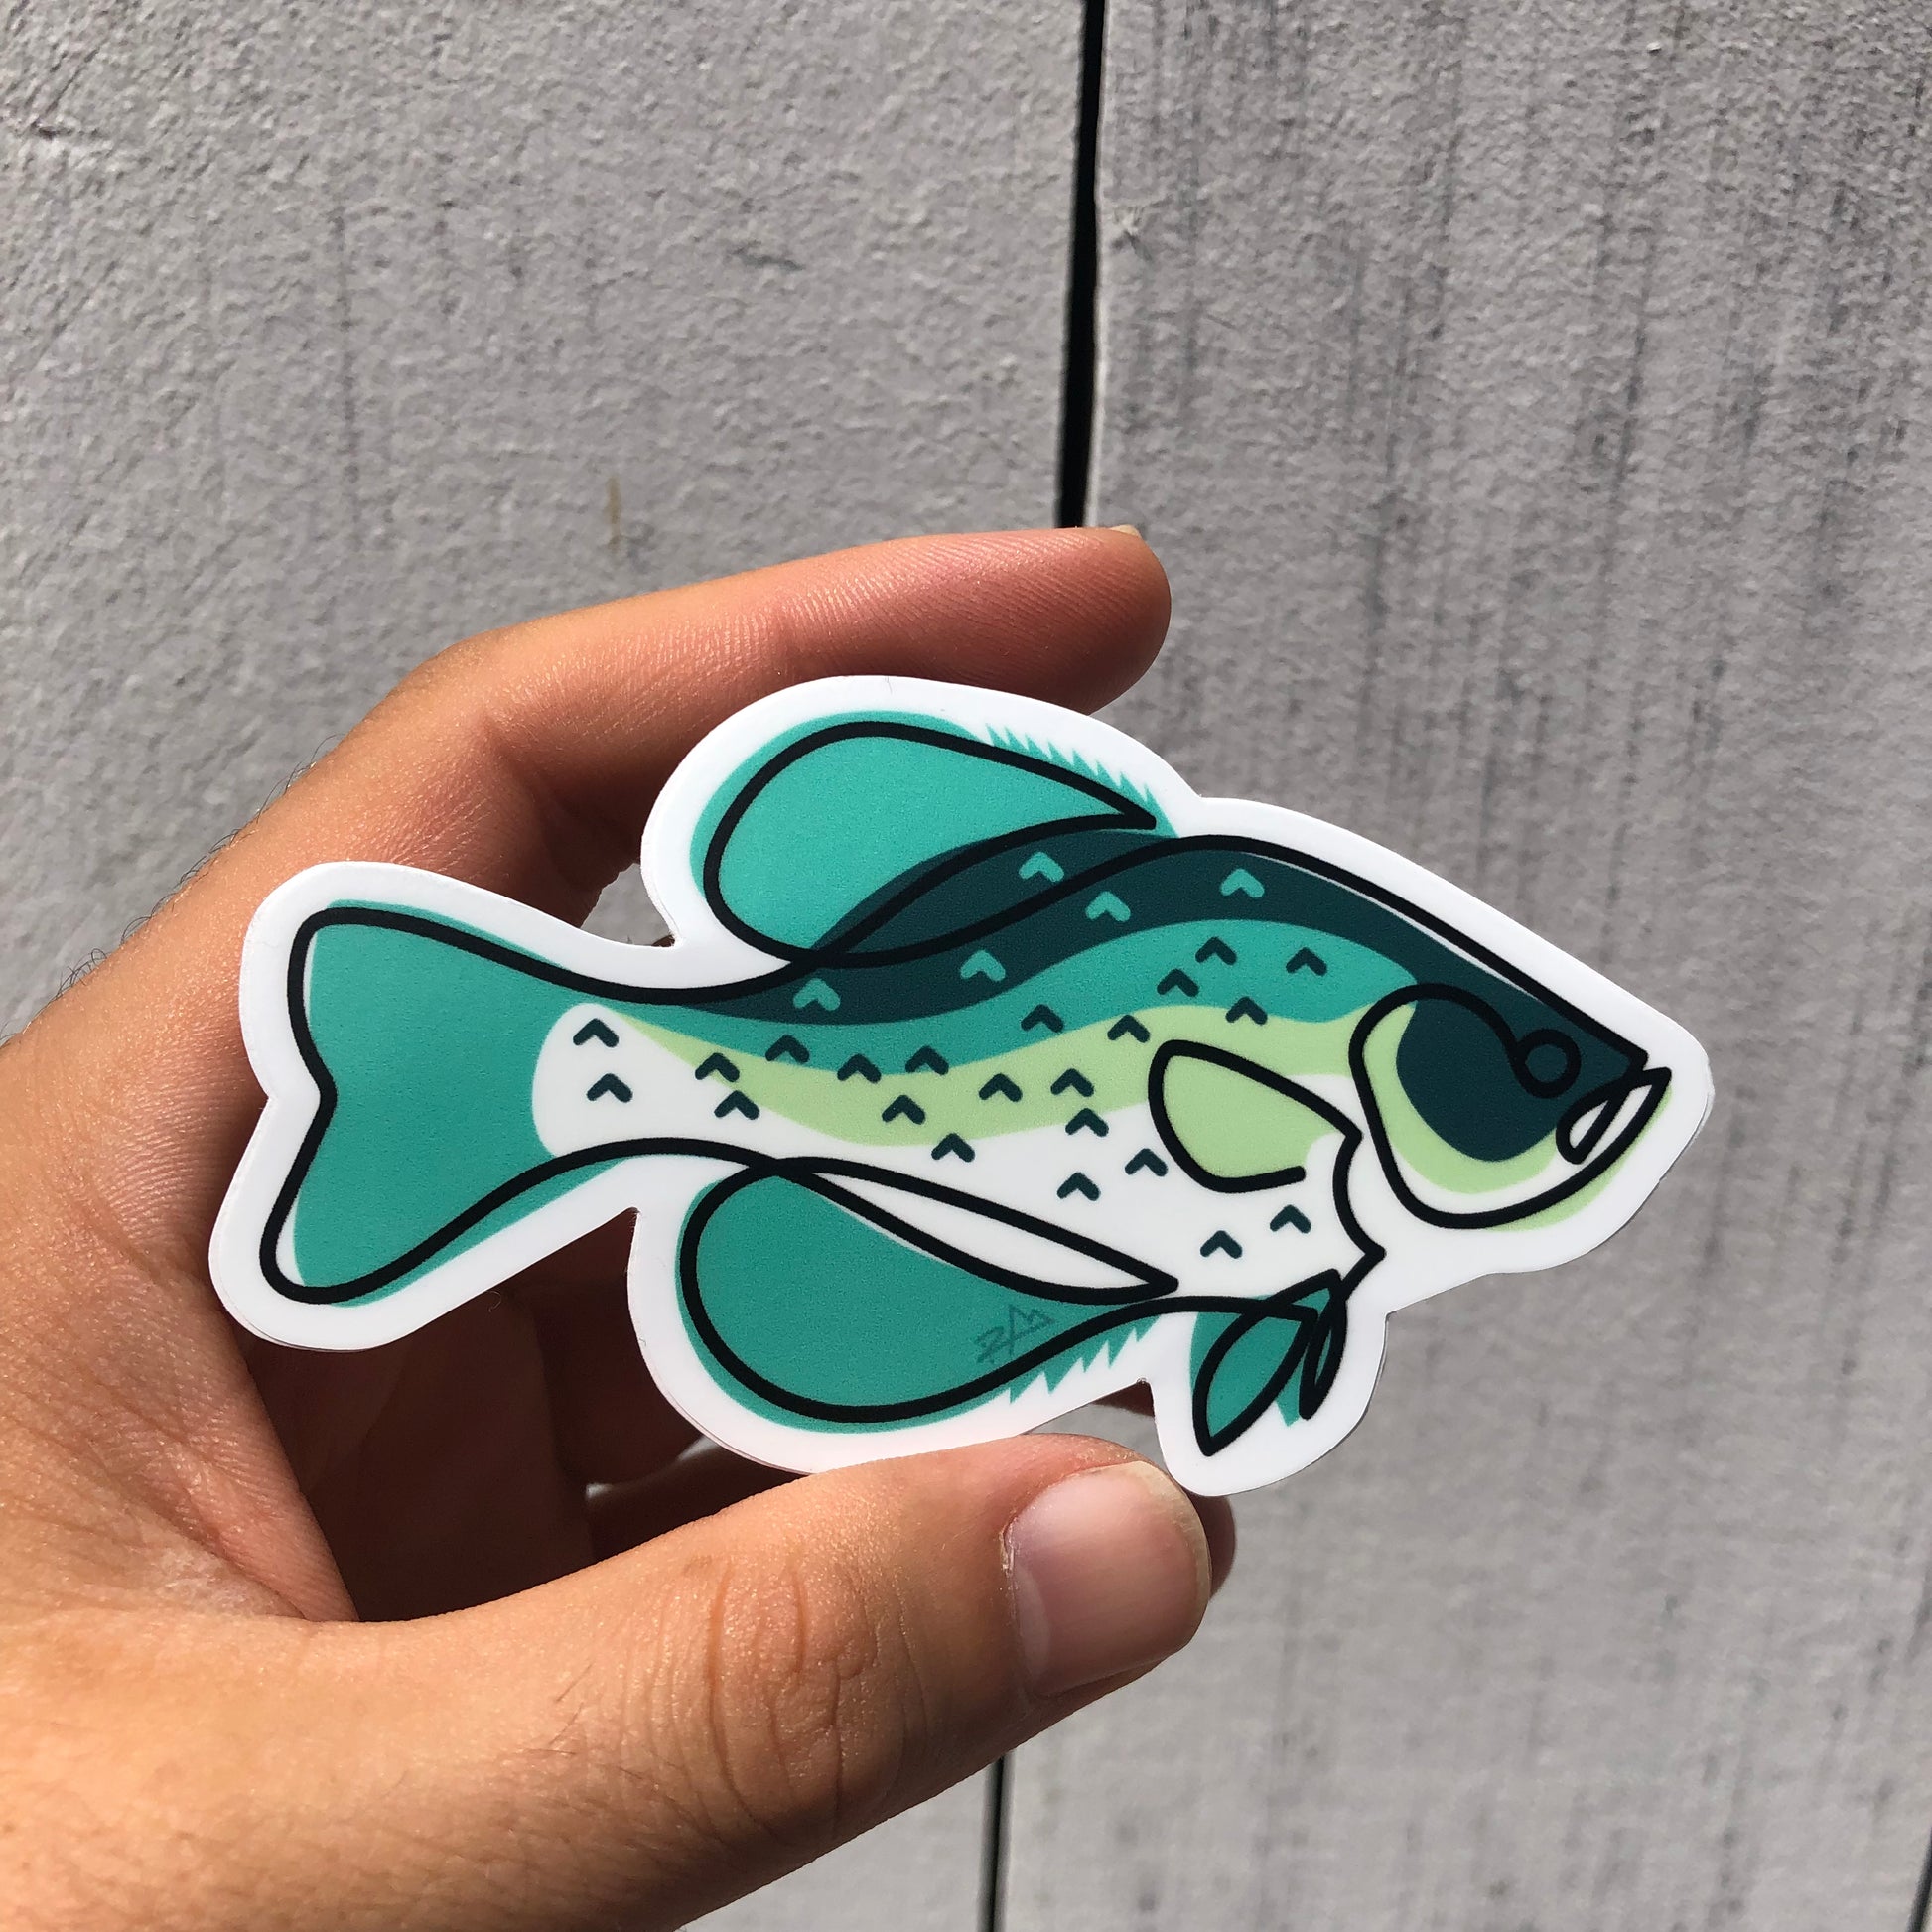 Thunderbird Design StudioCrappie - Single Line Decal w/ Matte FinishCrappie - Single Line DecalSticker
4" Drawn, Single Line Crappie Illustration.These high quality, super durable and weatherproof Matte decals are perfect for your Rod tube, water bottle, tackle box, 